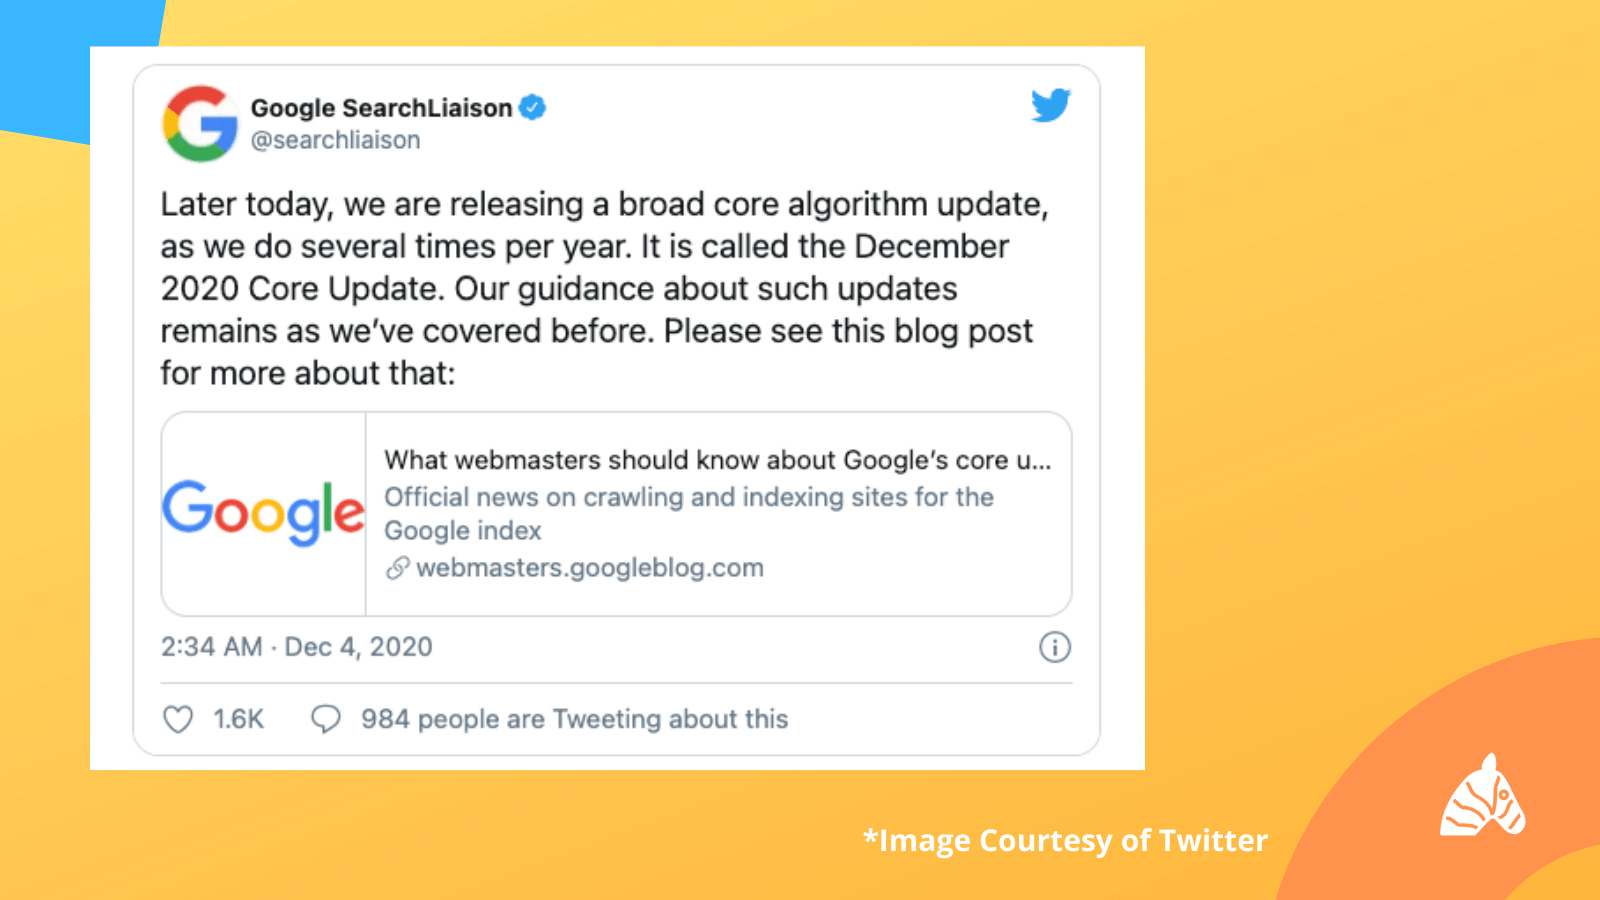 Google Search Liaison Tweet about december 2020 core update